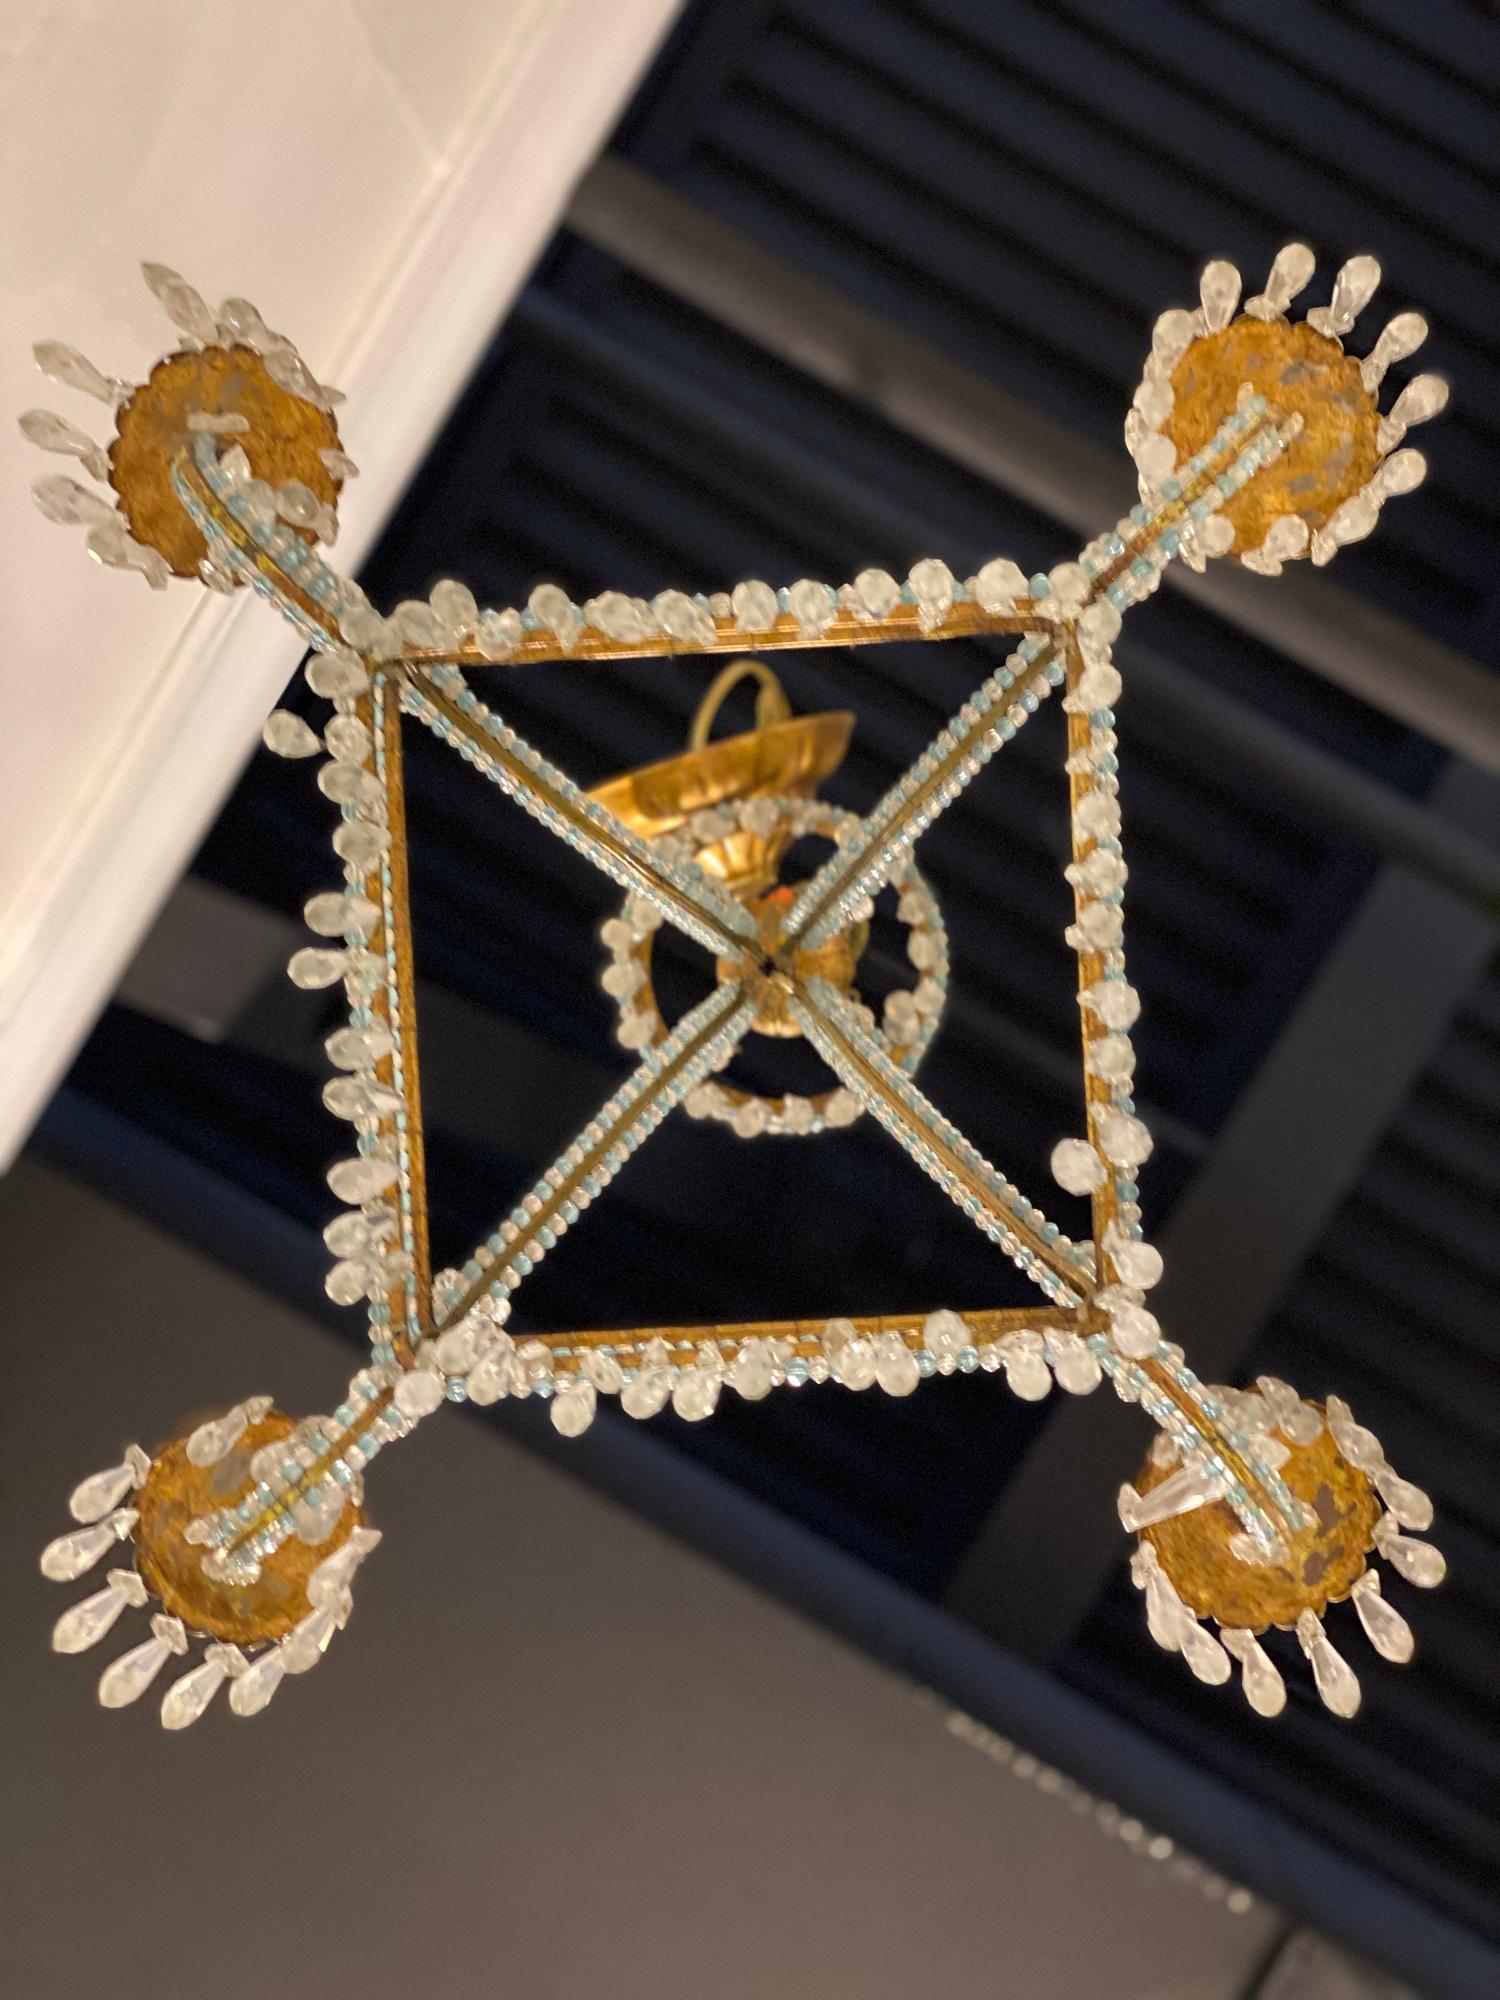 A circa 1930's Italian gilt metal square chandelier with white and blue beaded crystals on body, also hanging crystals. Has 4 lights